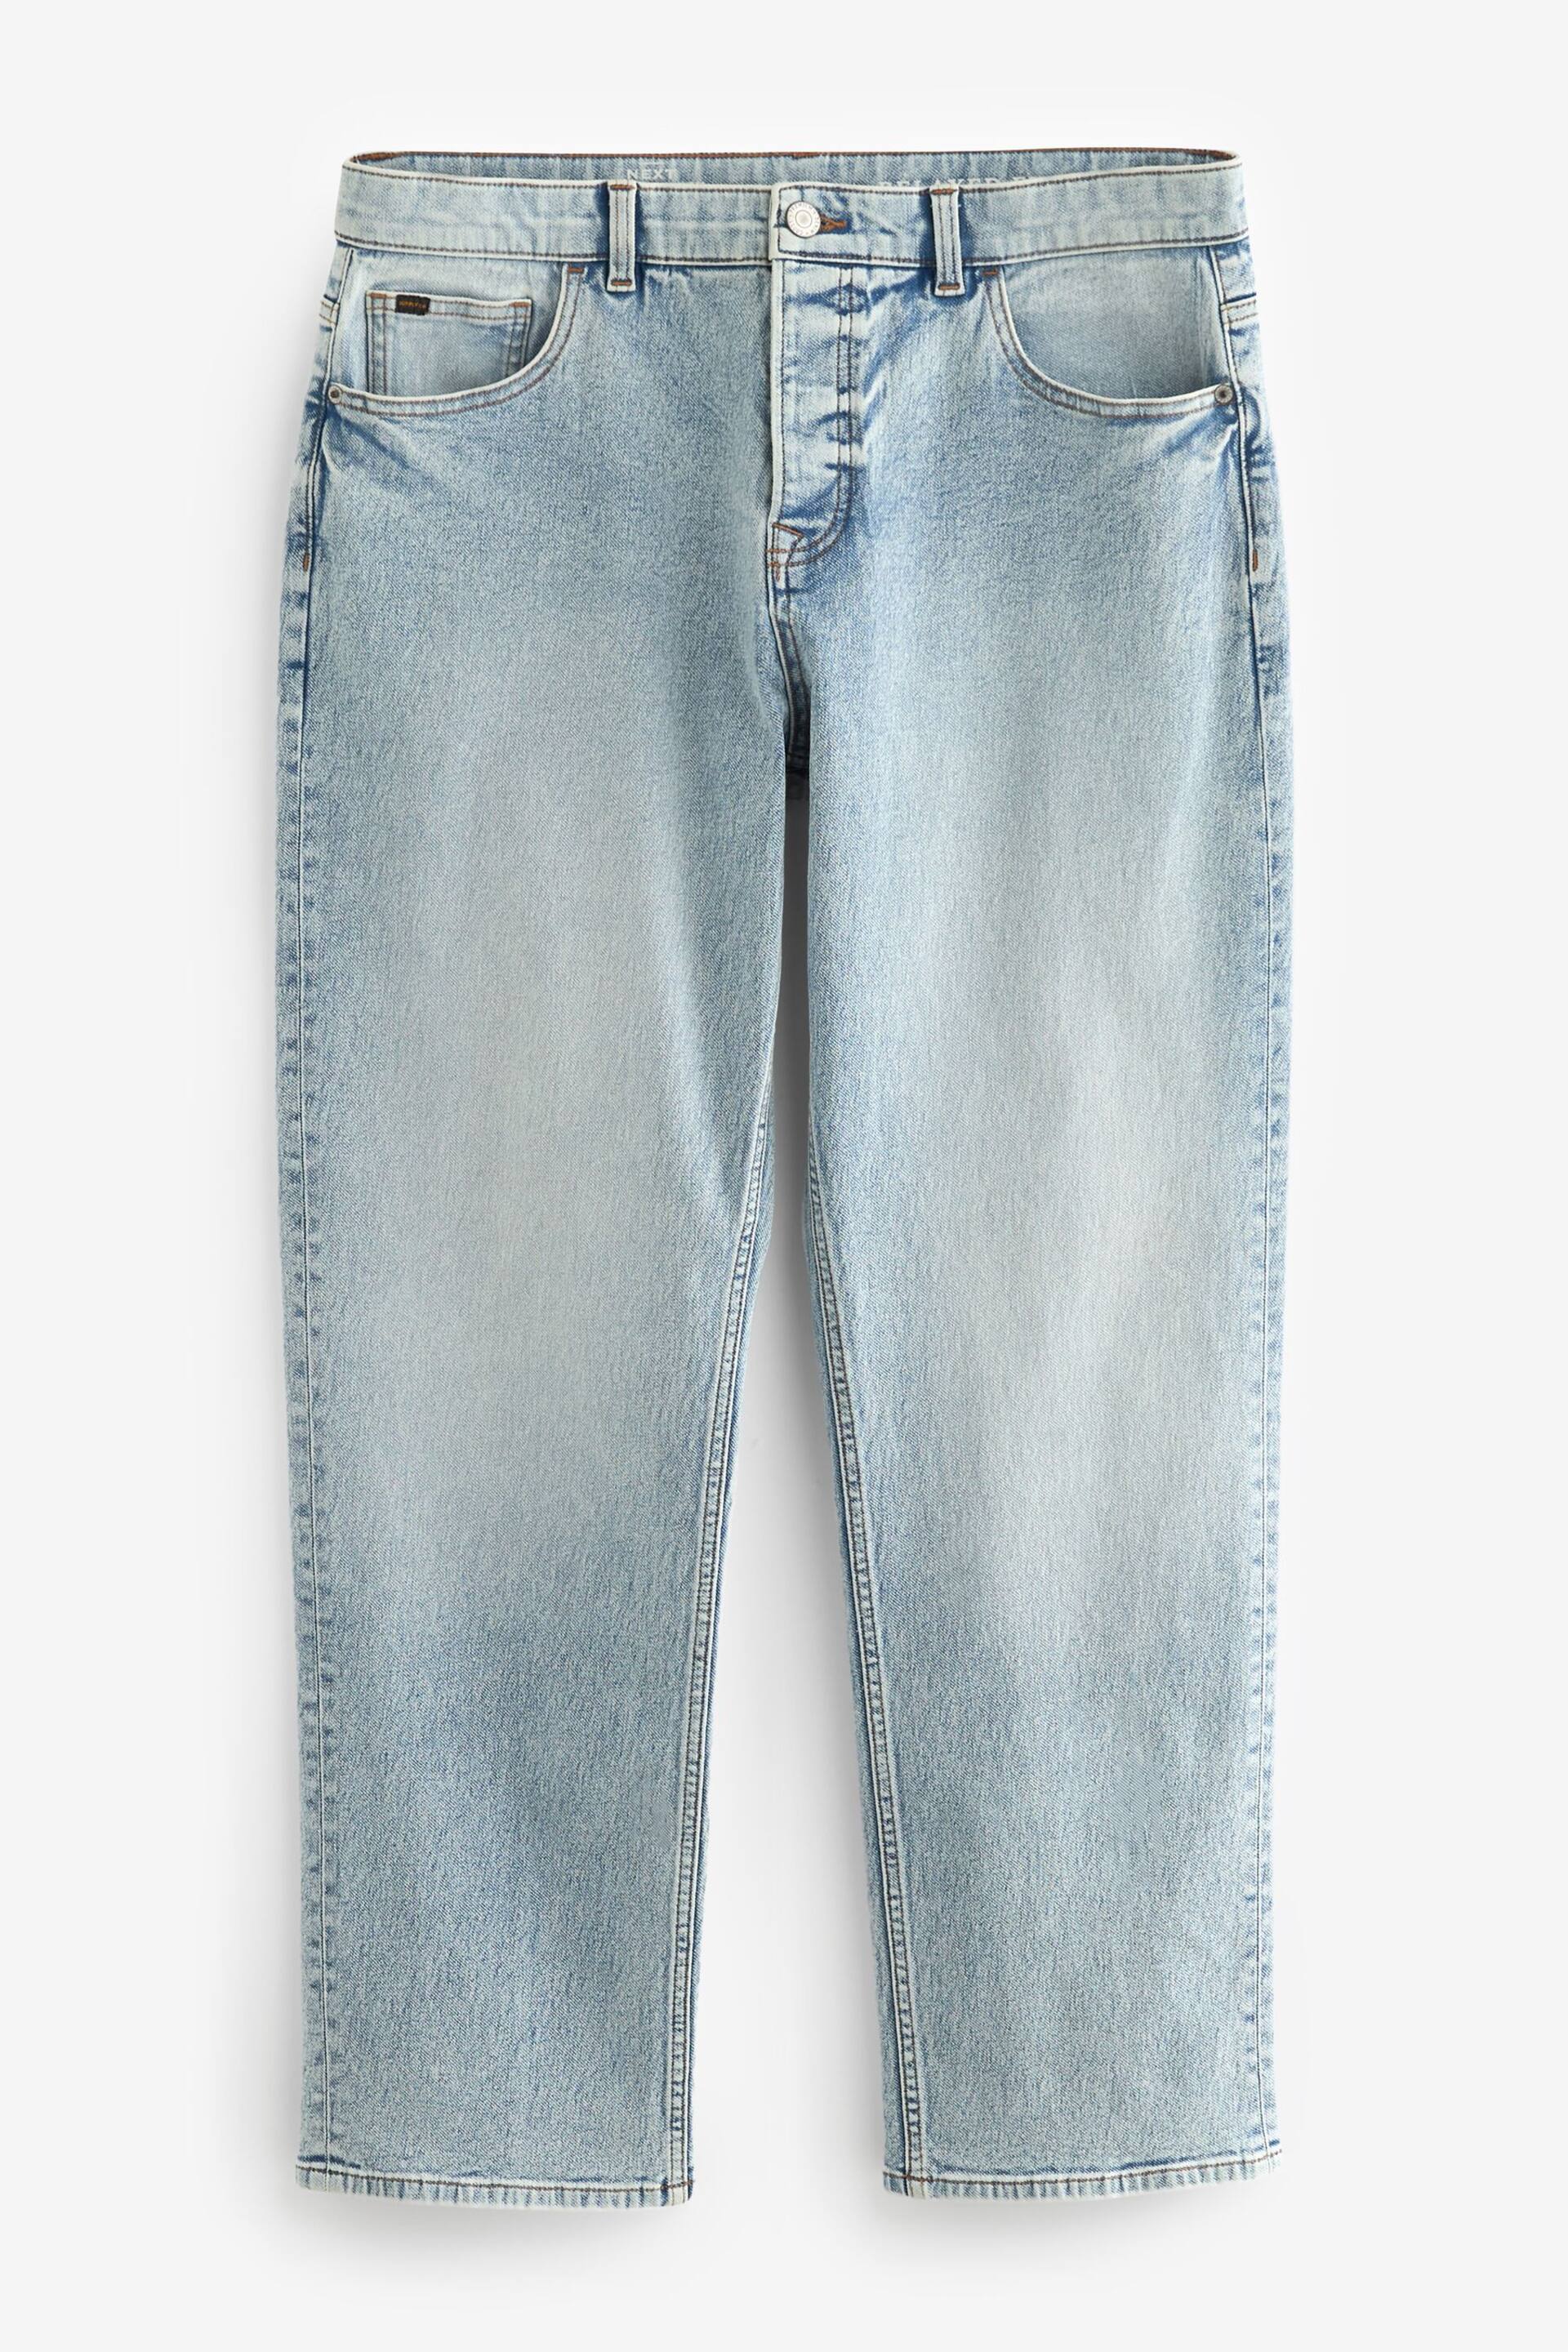 Blue Light Relaxed Fit Vintage Stretch Authentic Jeans - Image 7 of 11